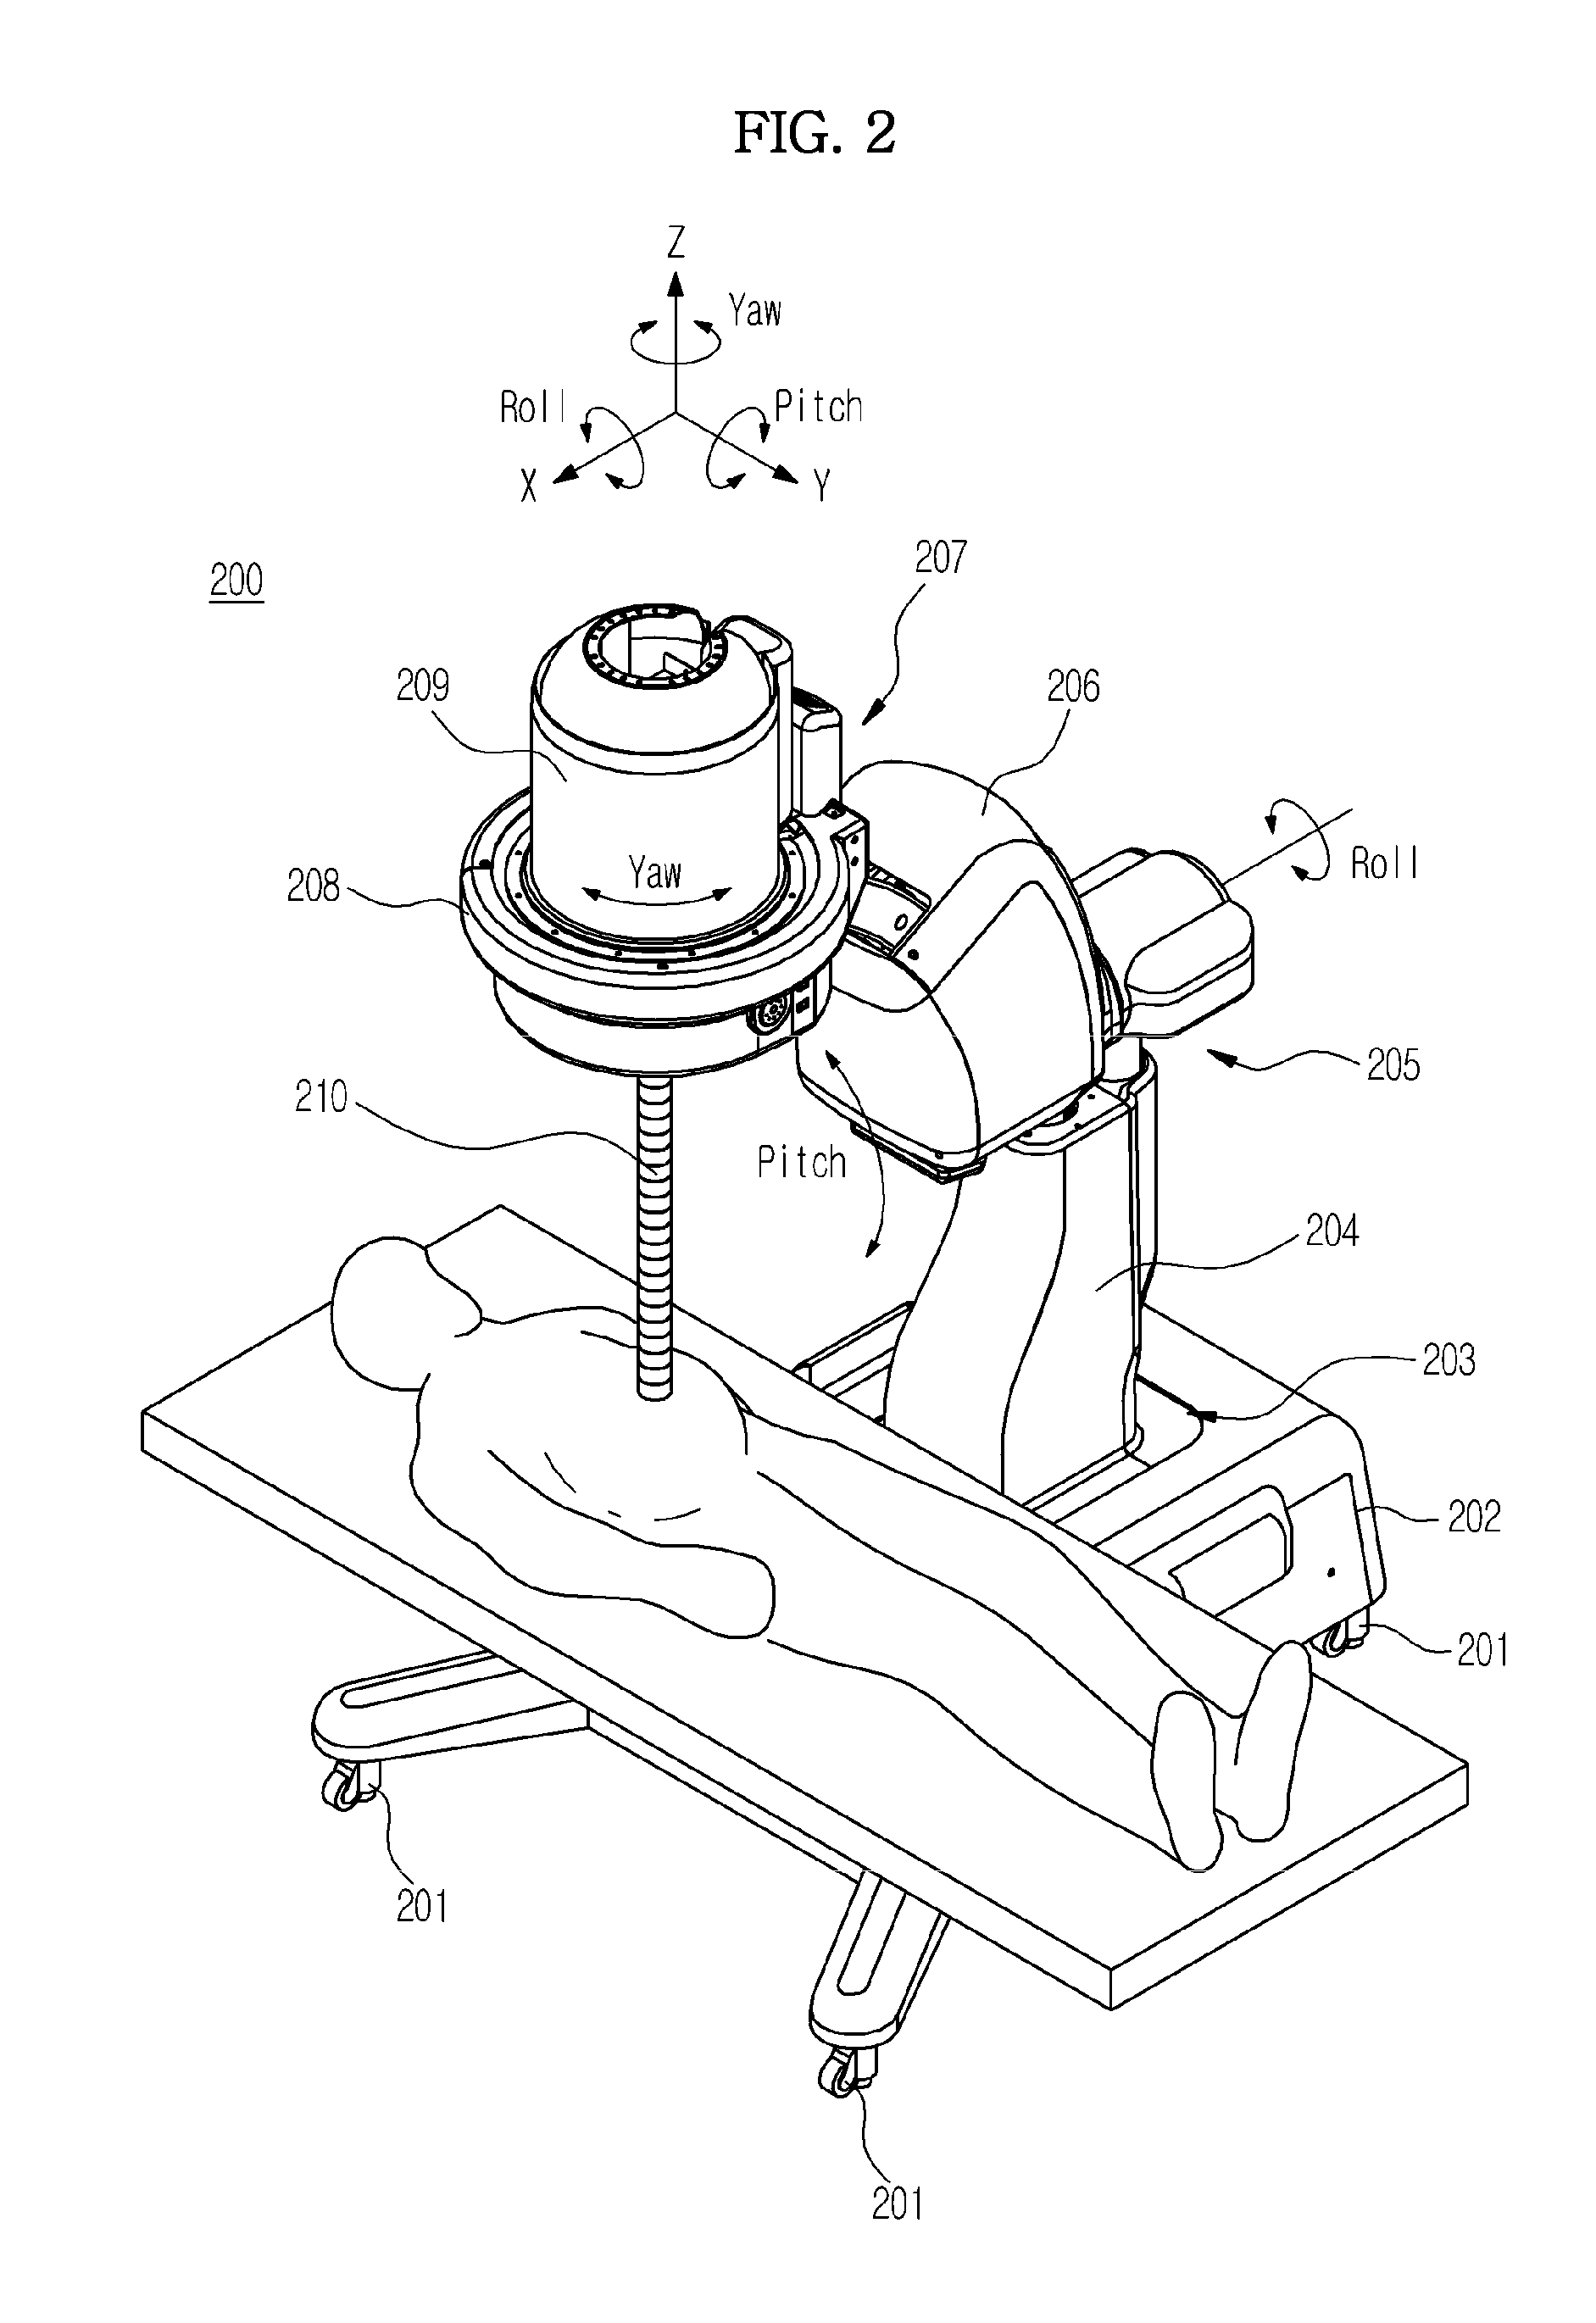 Surgical robot system and method of controlling the same